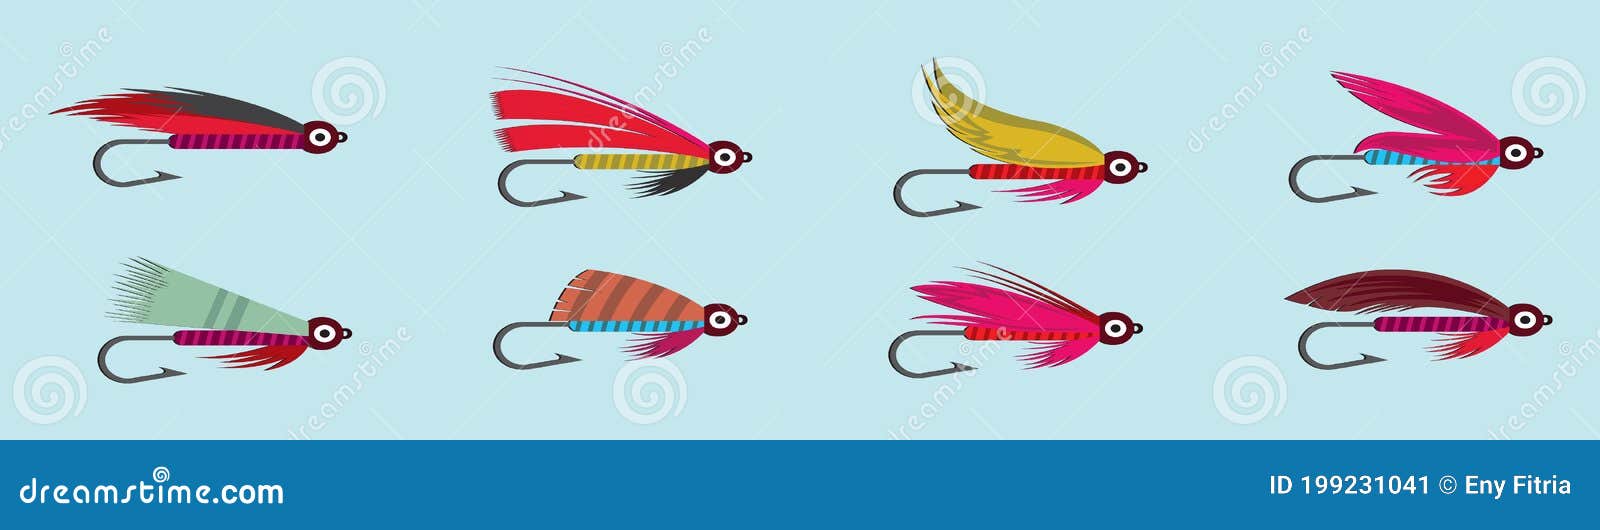 https://thumbs.dreamstime.com/z/set-fly-fishing-flies-cartoon-icon-design-template-various-models-vector-illustration-isolated-blue-background-199231041.jpg